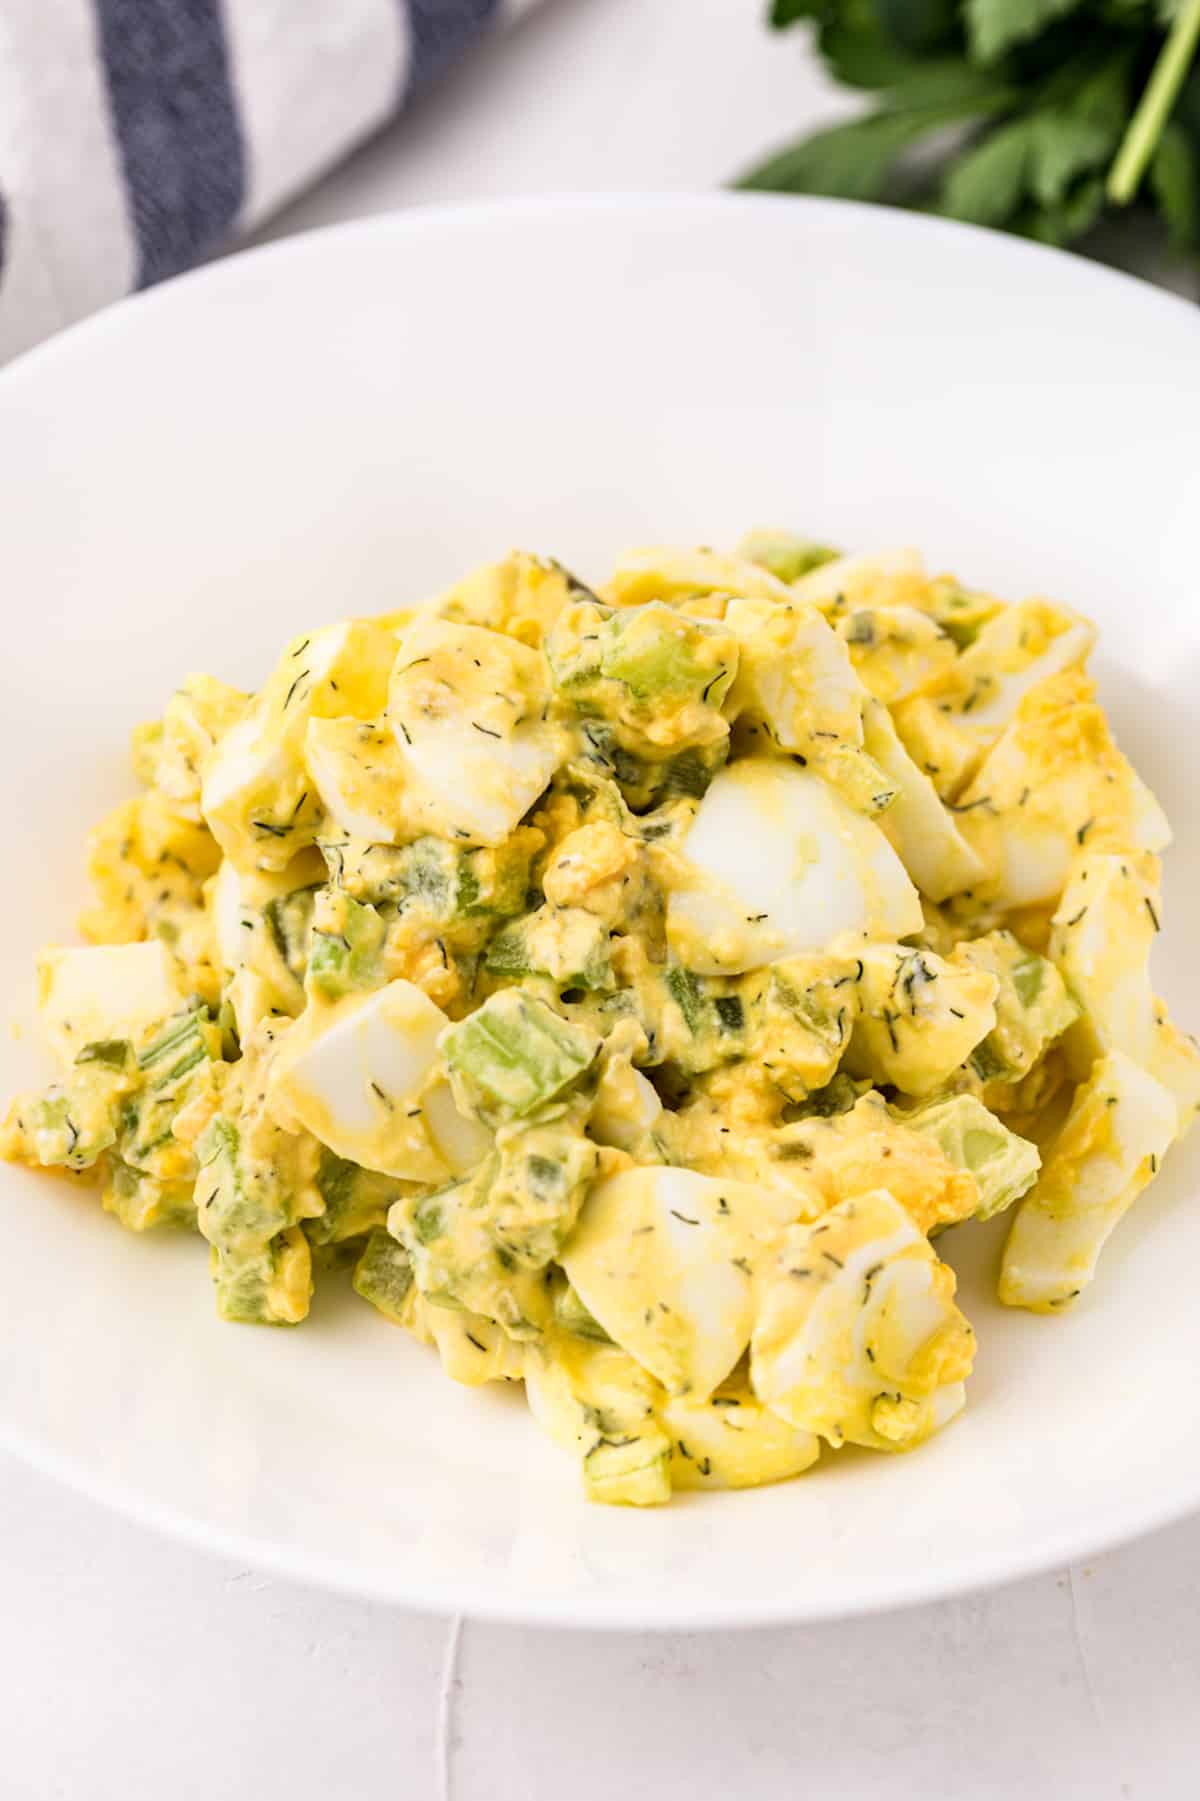 A plate of egg salad with celery